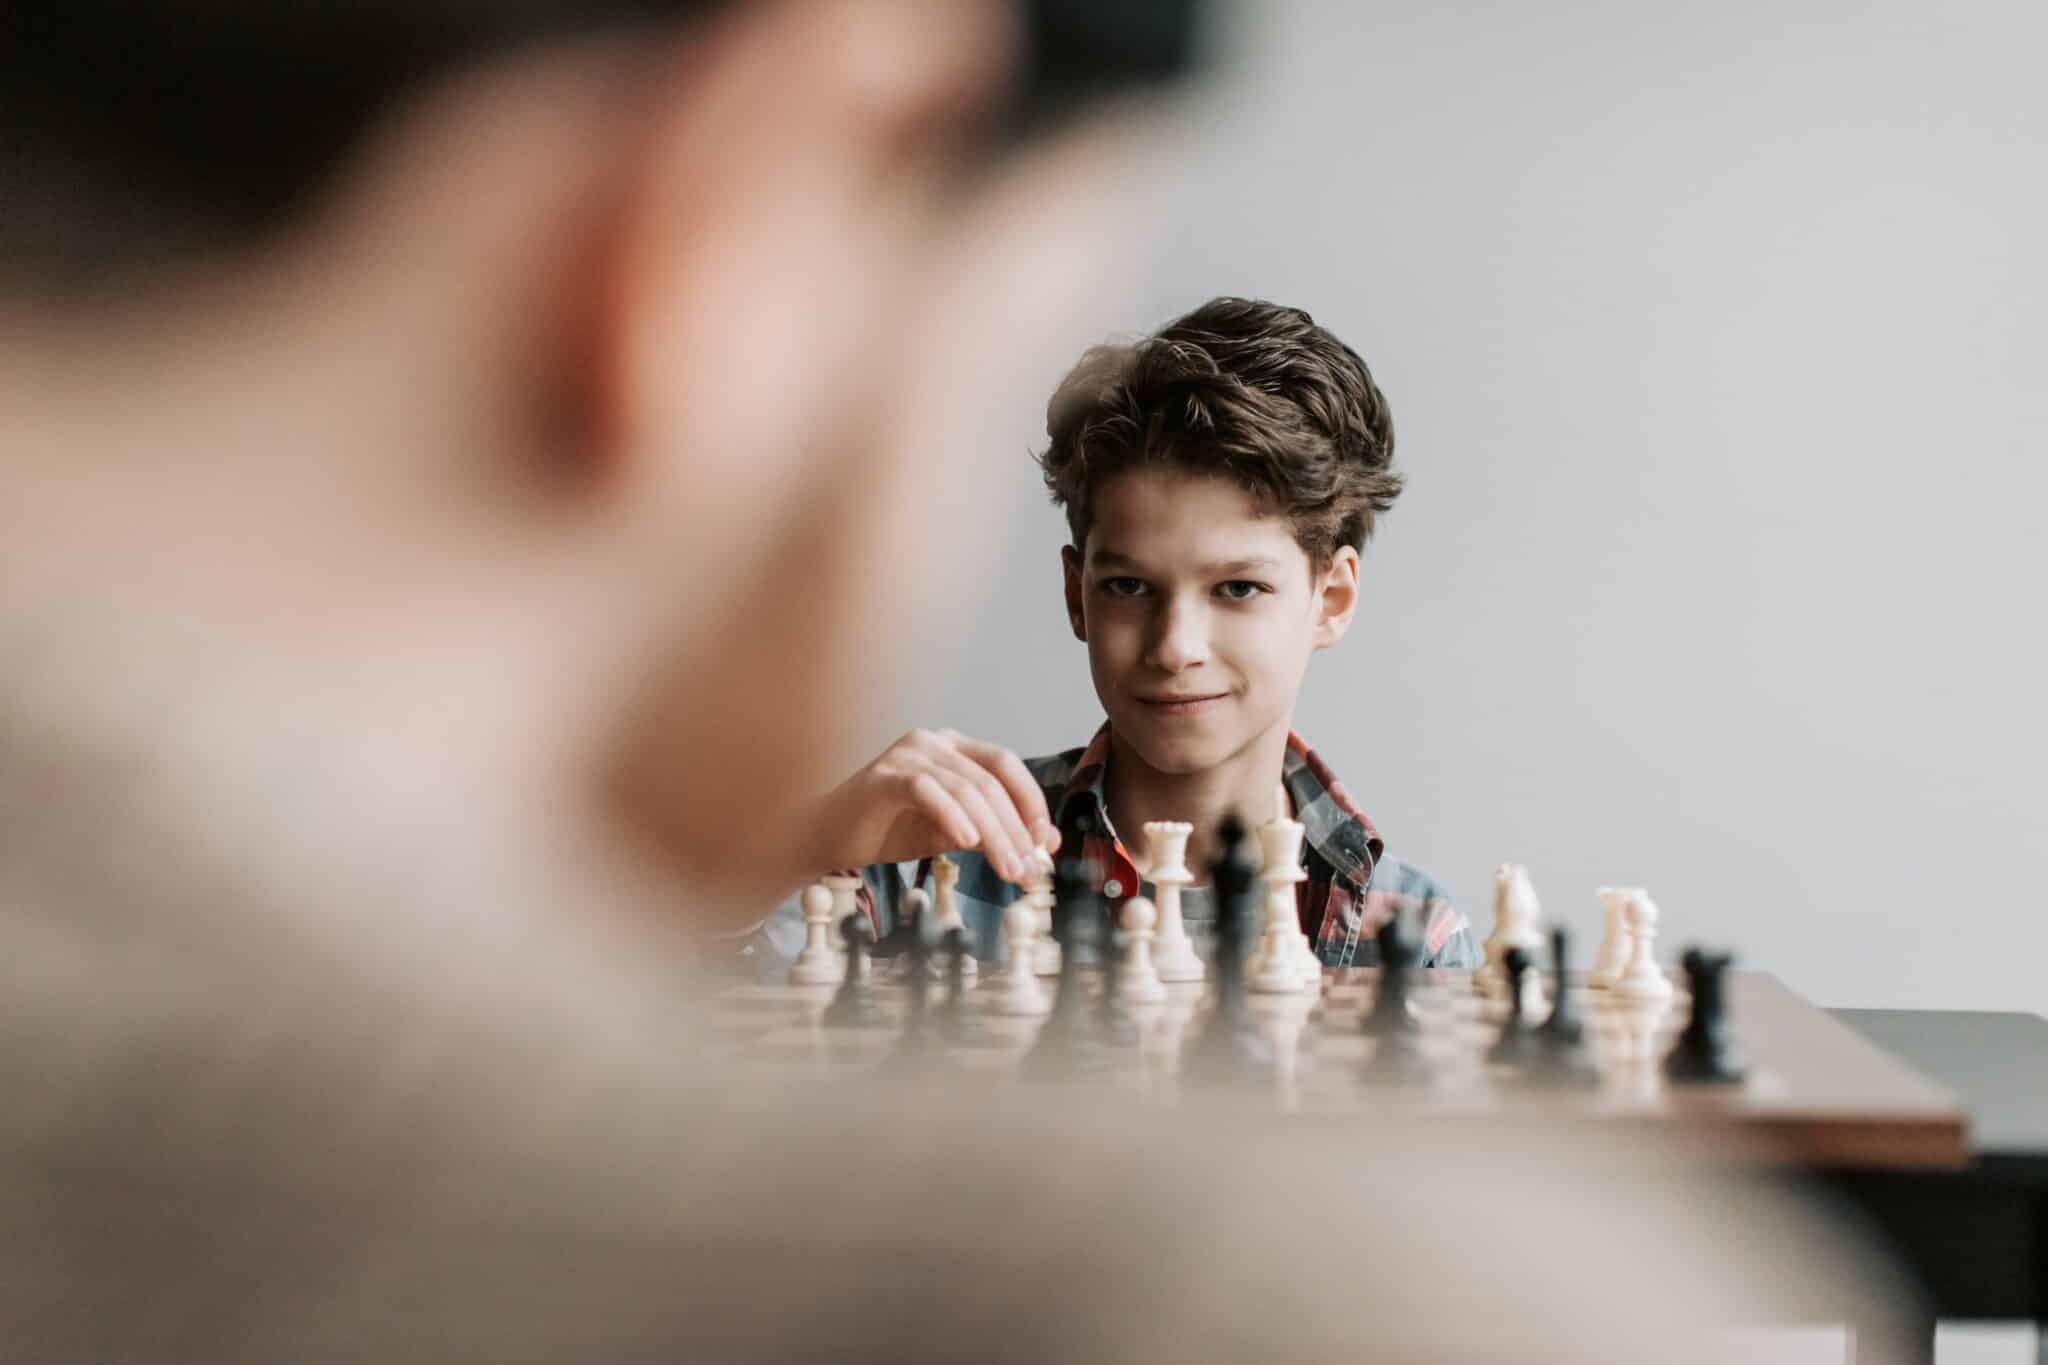 Checkmate: Teaching Chess to Develop Critical Thinking Skills